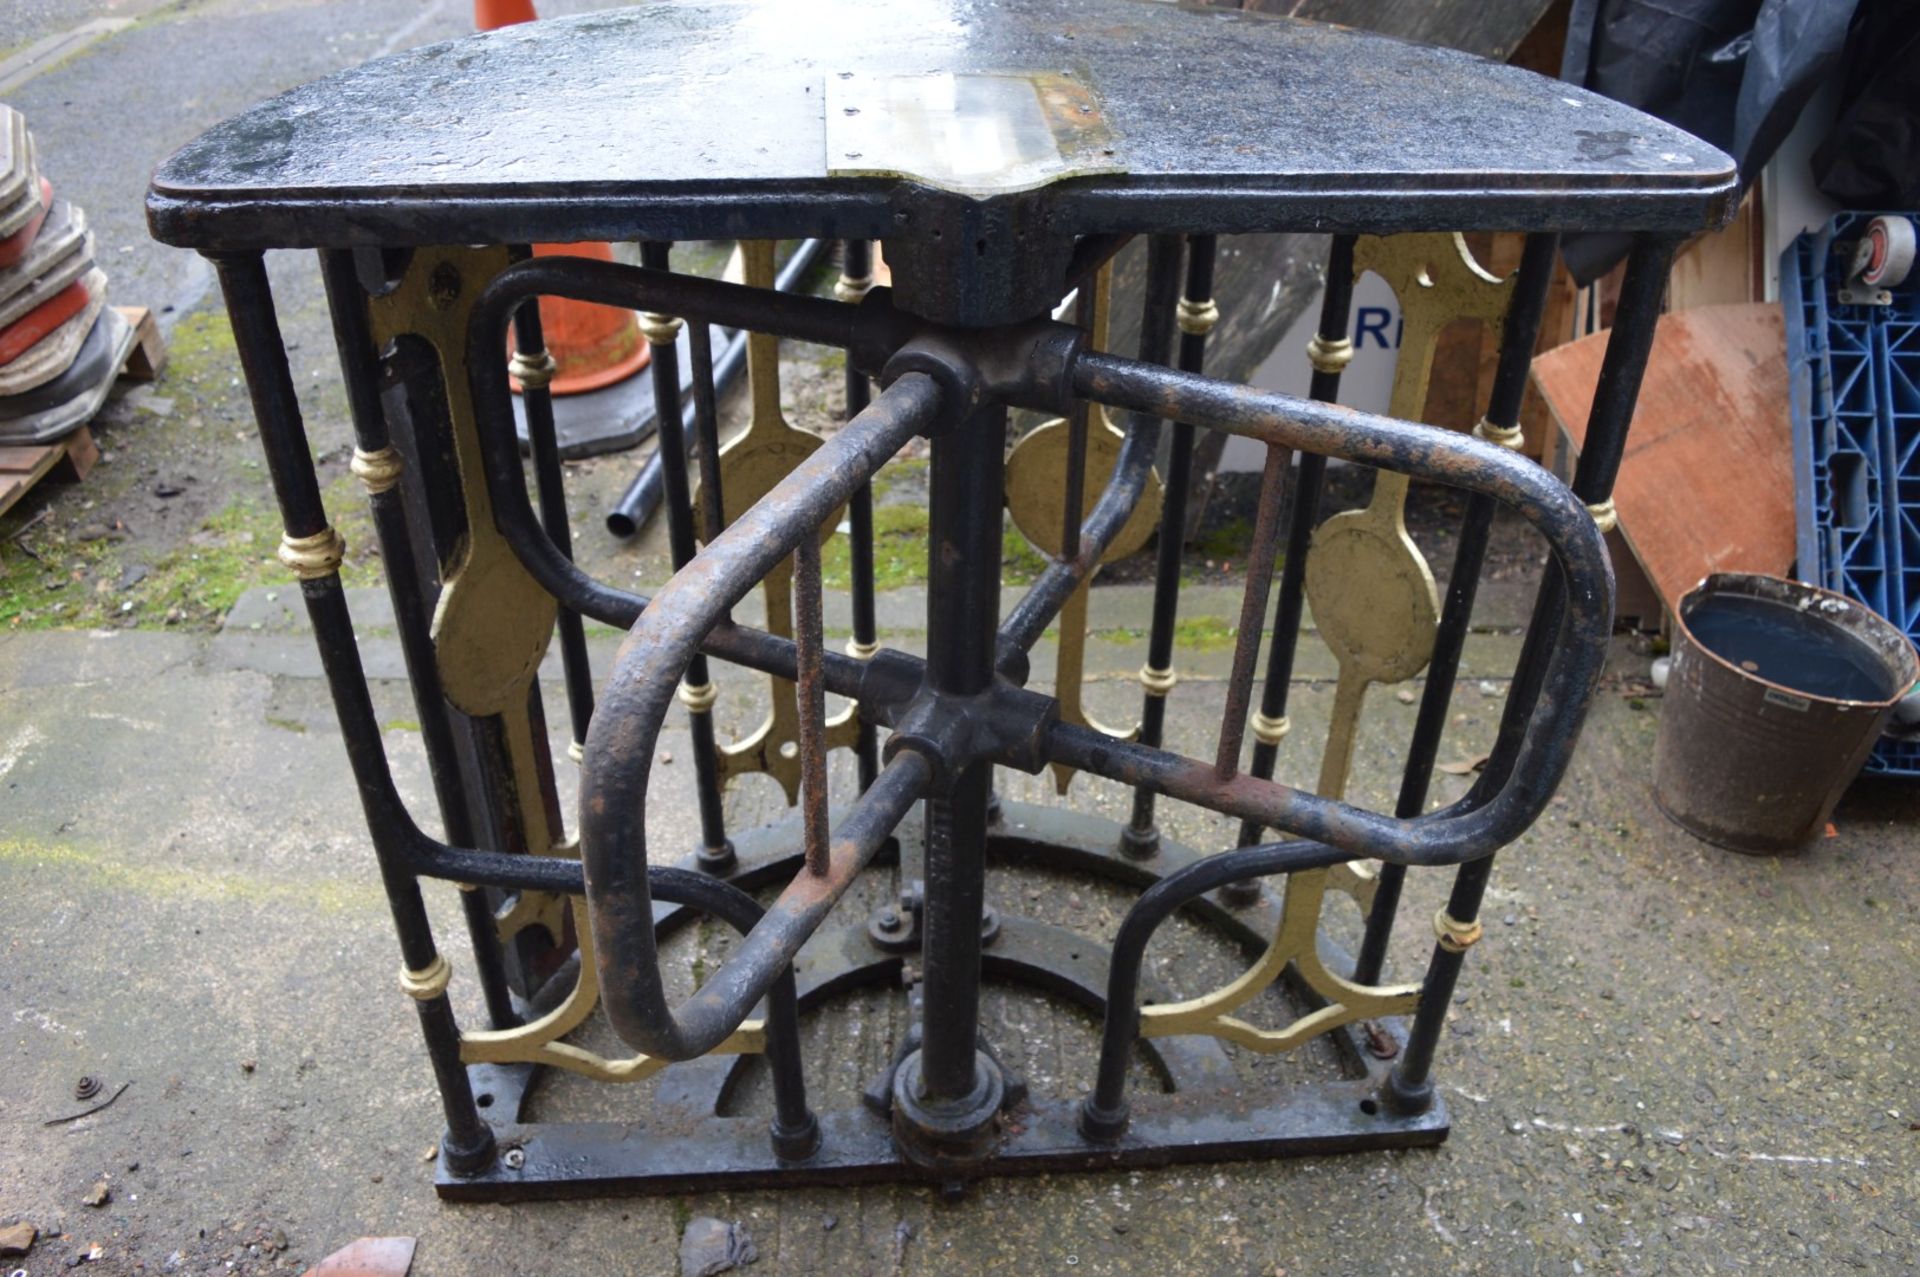 1 x Antique Turnstyle By R T Ellison & Co Engineers Salford Manchester - BB864 OS - CL351 - - Image 7 of 11